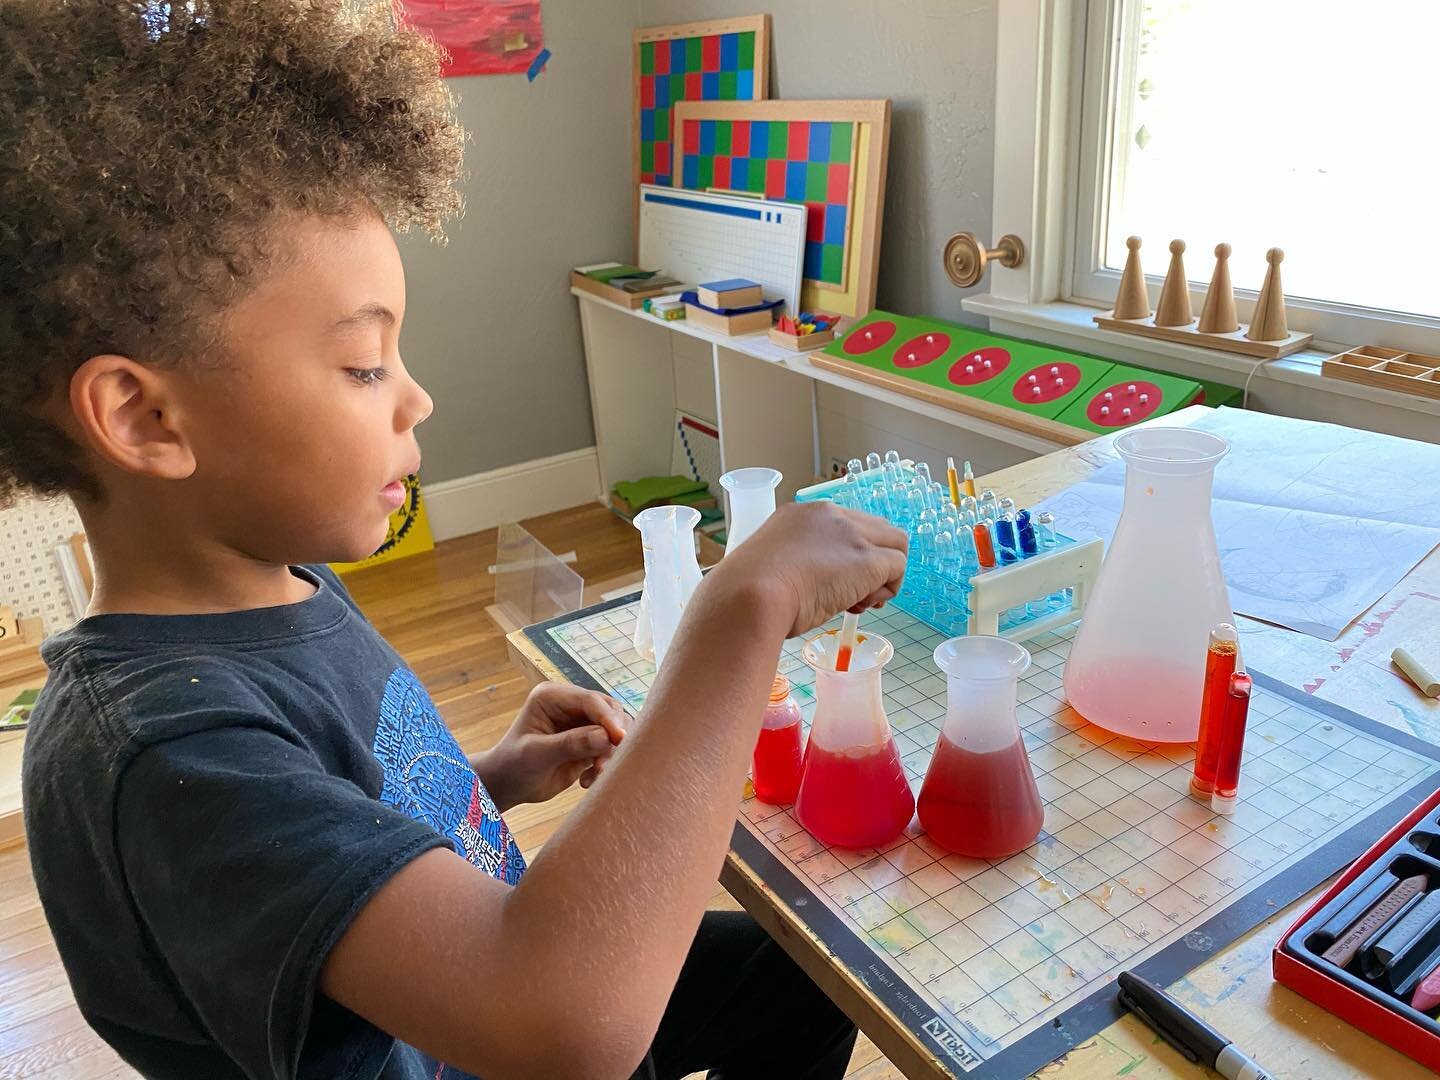 Science, it&rsquo;s like magic! I love the oohs and ahs of simple kid chemistry experiments. 
🧪 🧫 
&ldquo;We especially need imagination in science. It is not all mathematics, nor all logic, but it is somewhat beauty and poetry.&rdquo;

Maria Monte